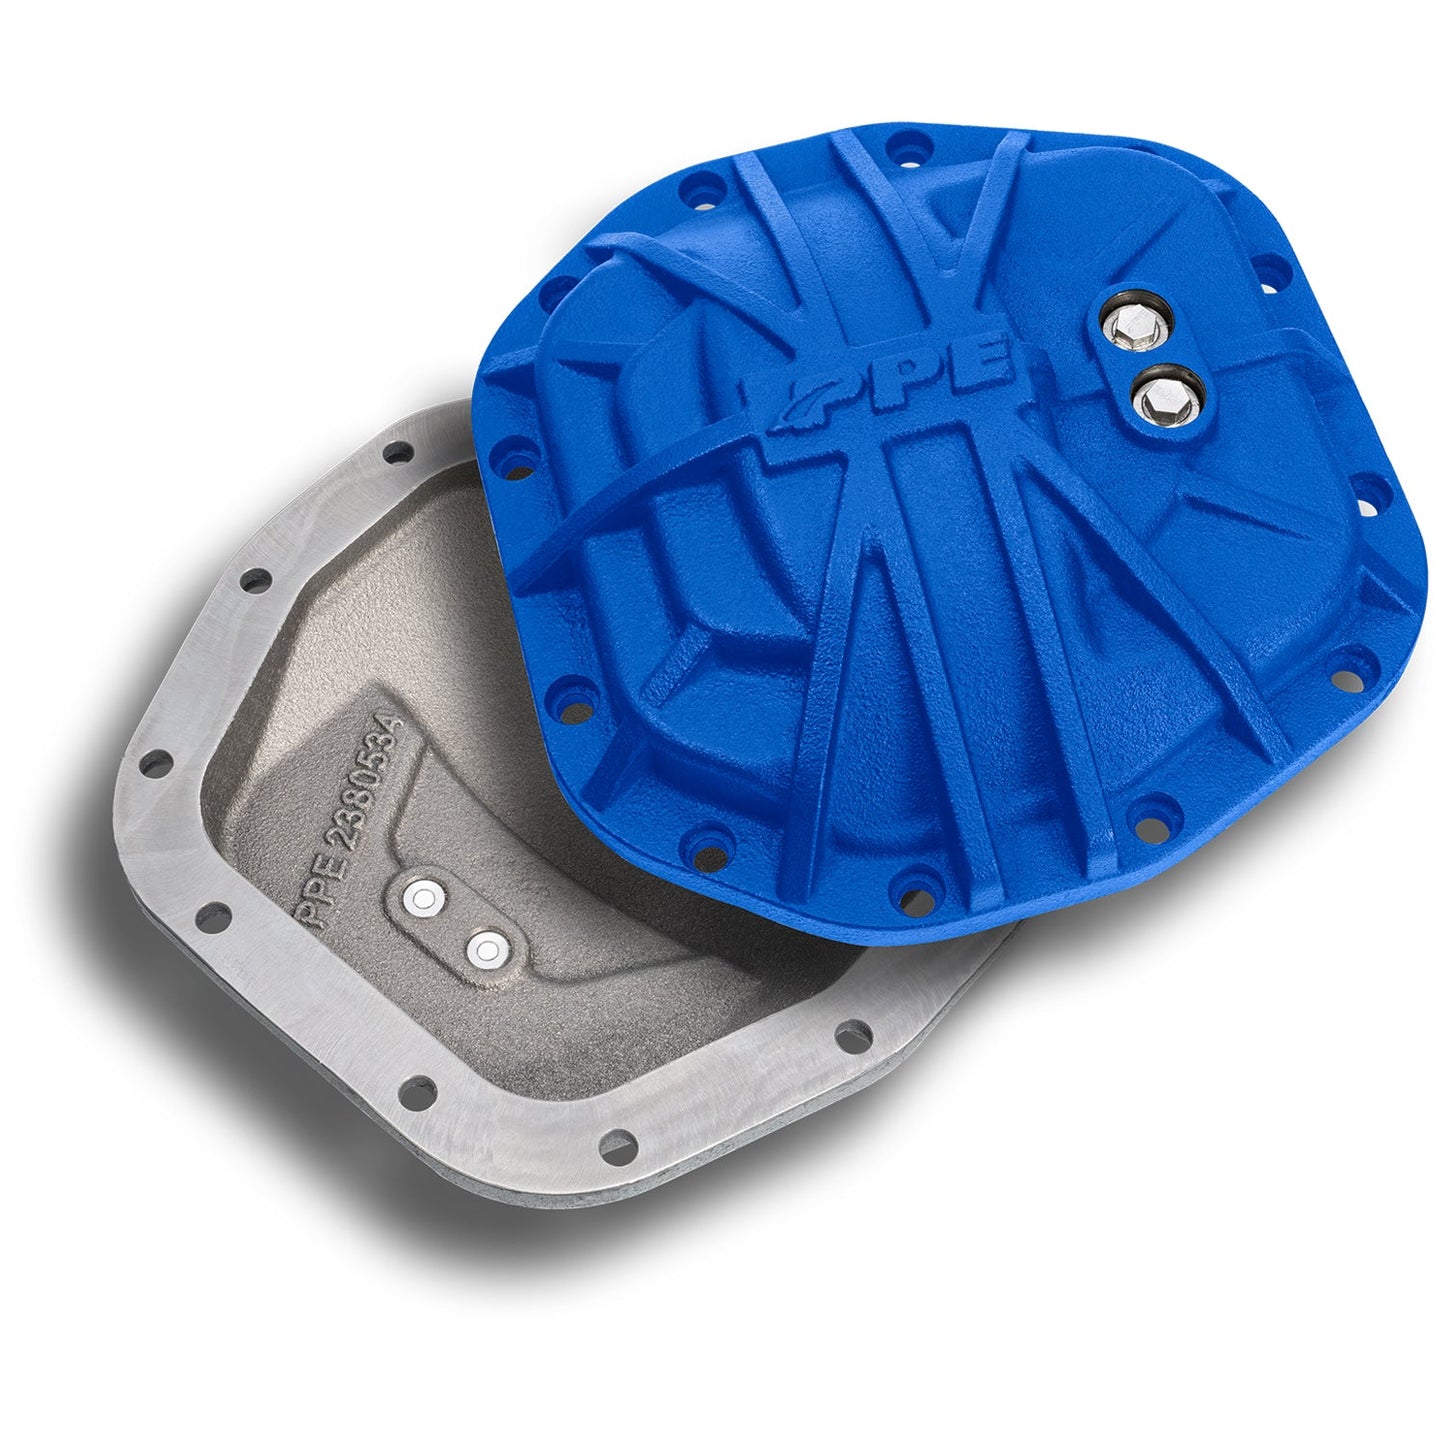 2018-2023 Jeep JL Dana 35-M200 Heavy-Duty Nodular Iron Rear Differential Cover Pacific Performance Engineering